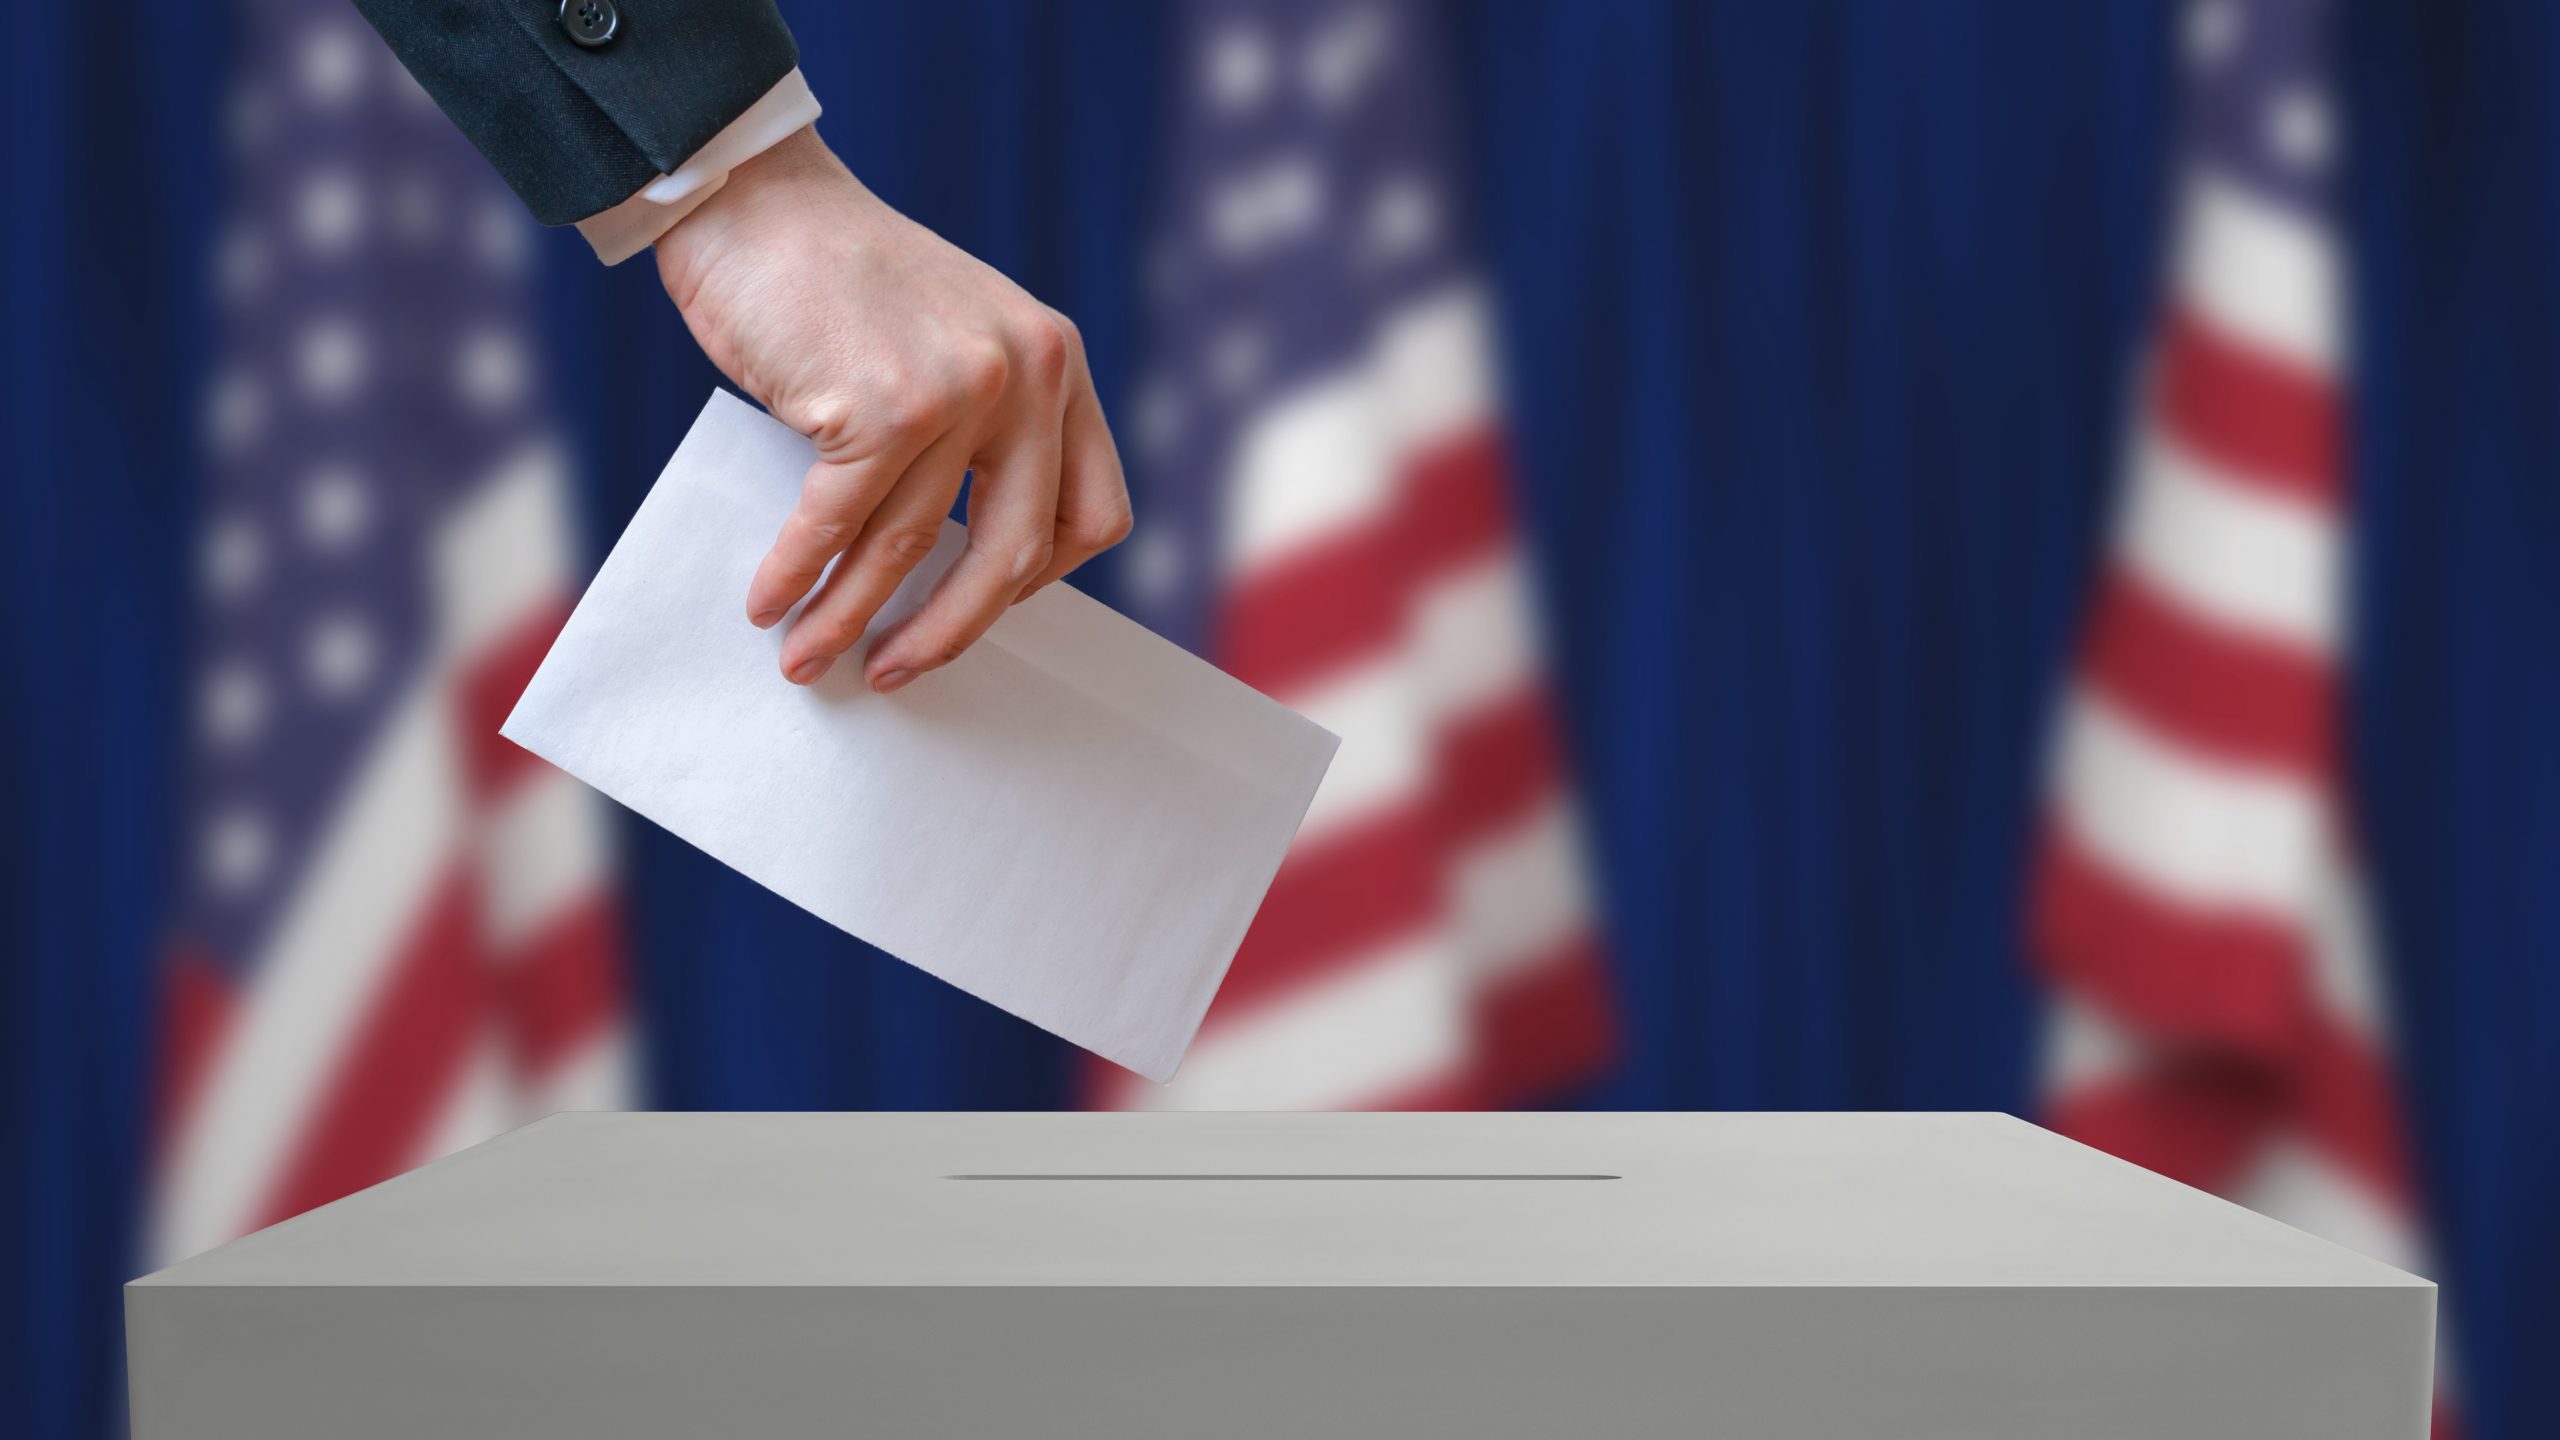 Election Integrity: Voter Rolls and Chain of Custody